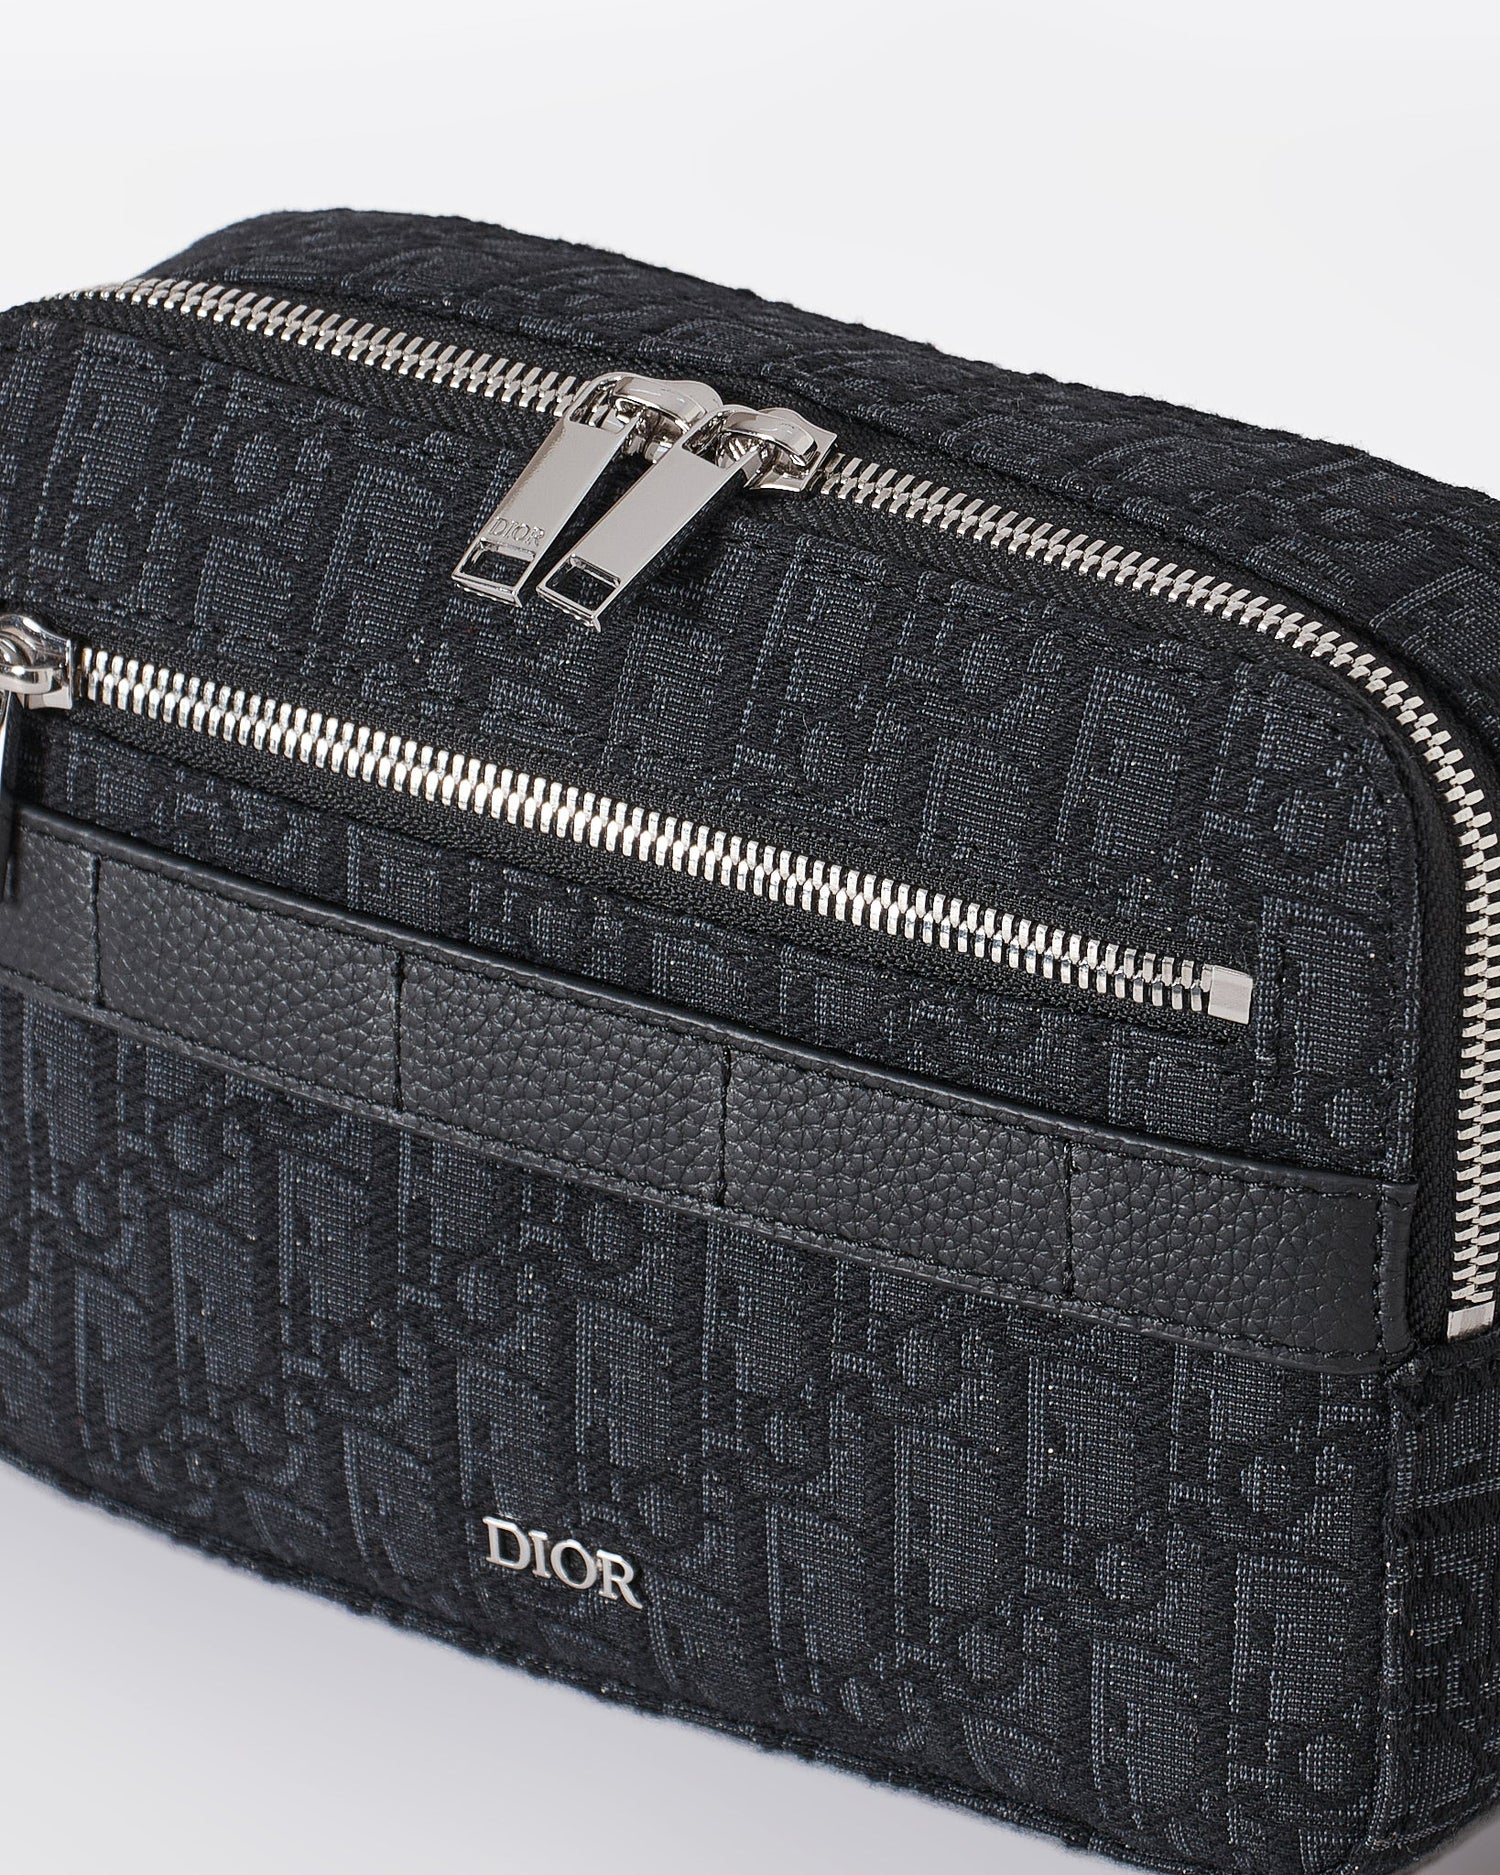 MOI OUTFIT-Dior Trunk Bag 239